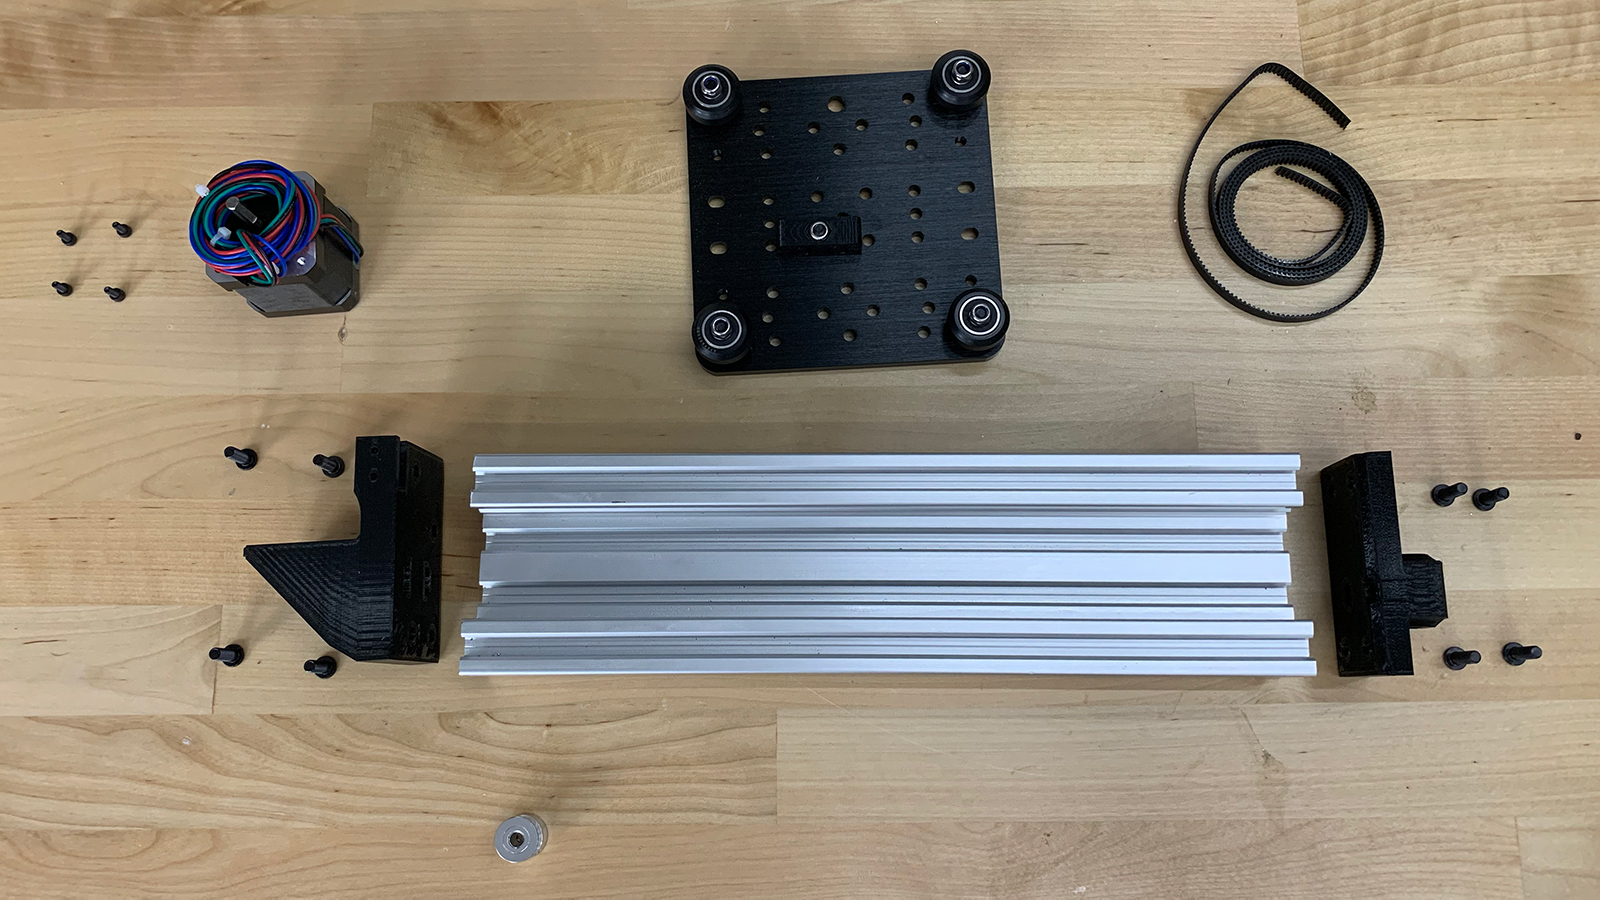 Assembly of Zidex's Y-axis